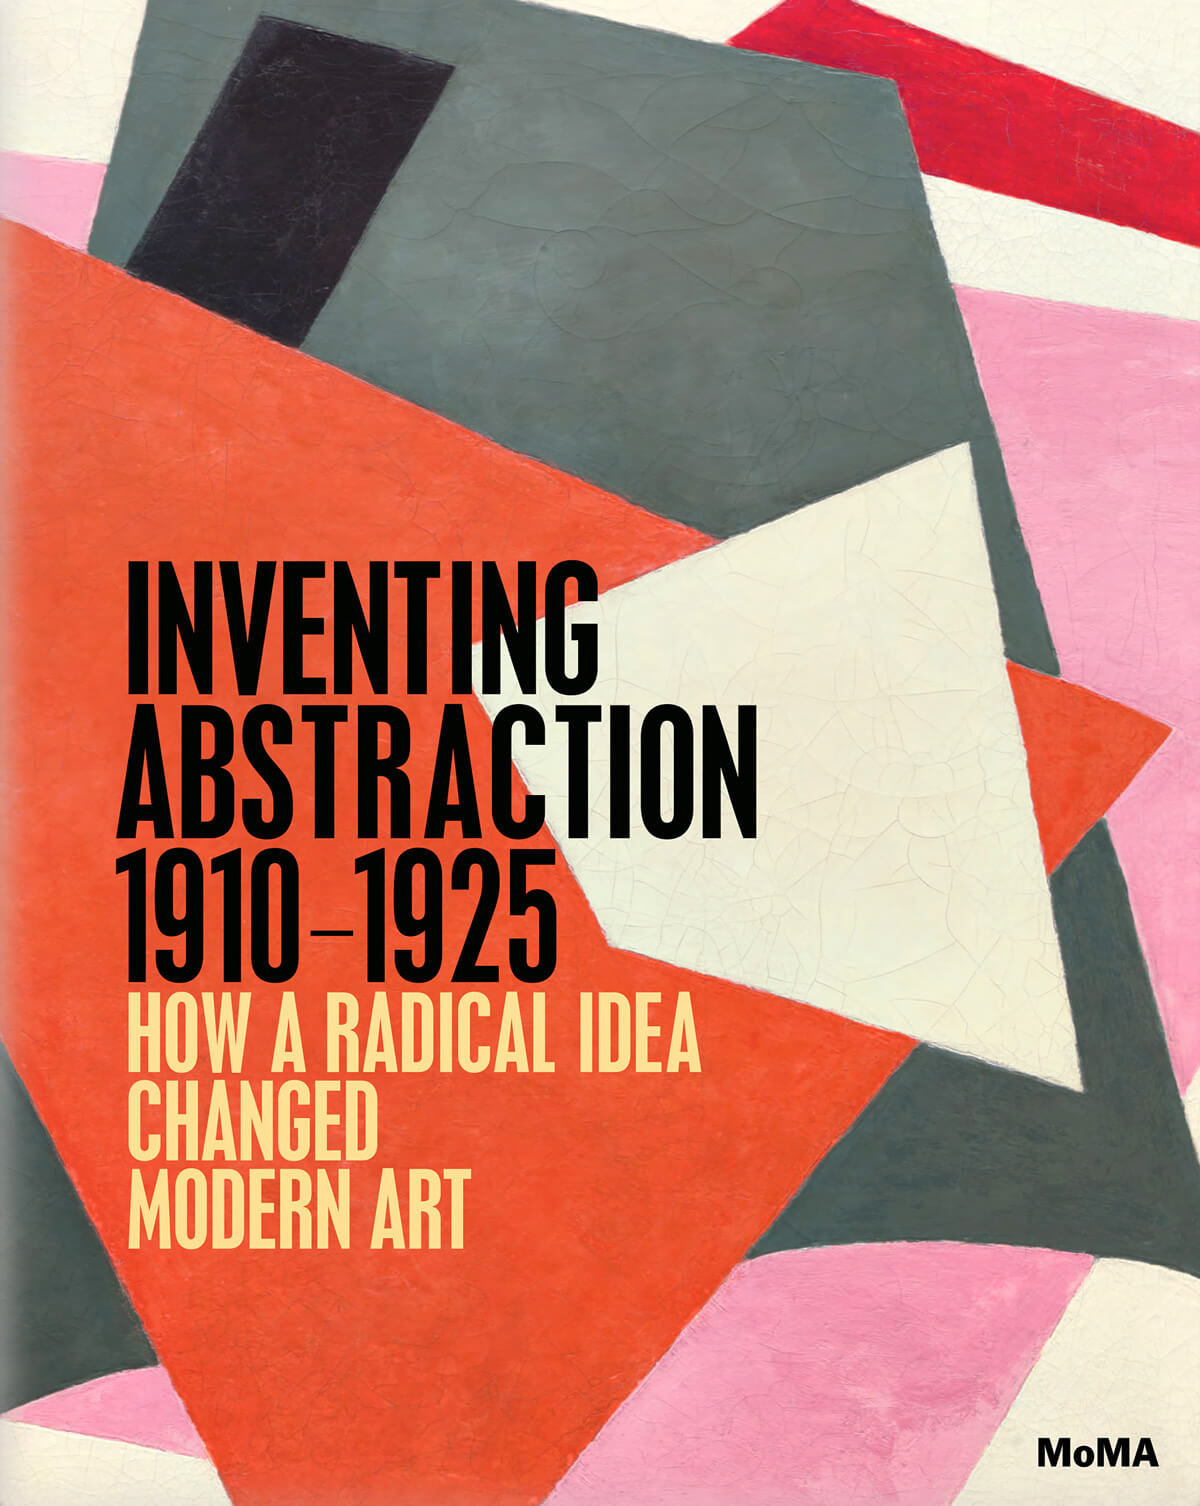 Inventing abstraction 1910-1925